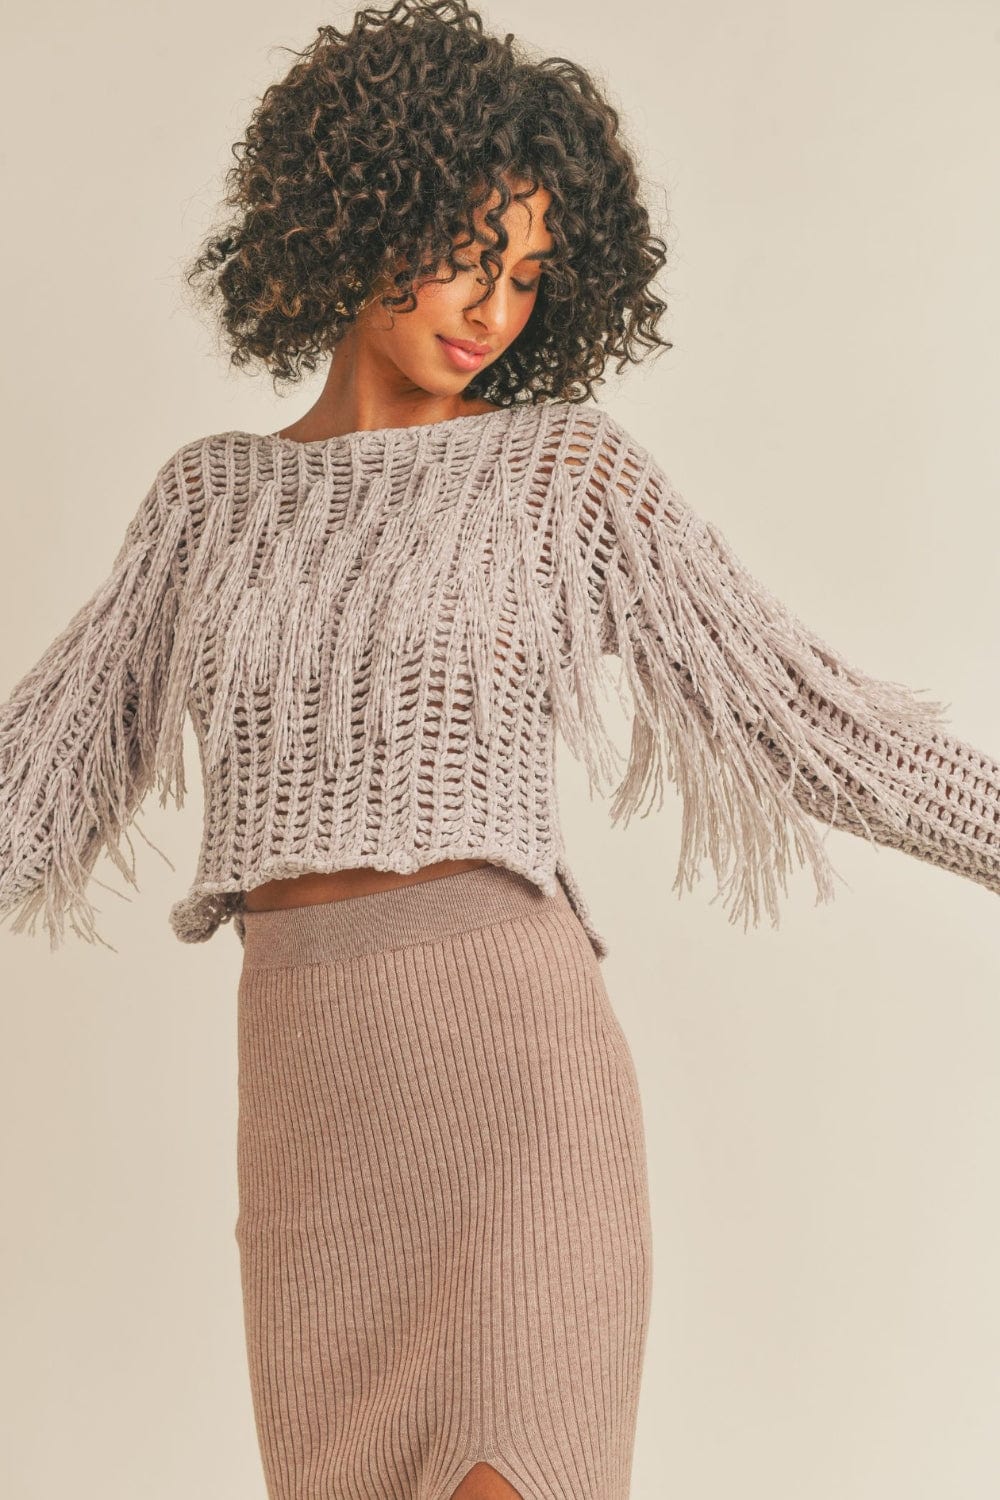 Sage The Label Stone Fringe Knit Sweater Top - Shirts & Tops - Blooming Daily